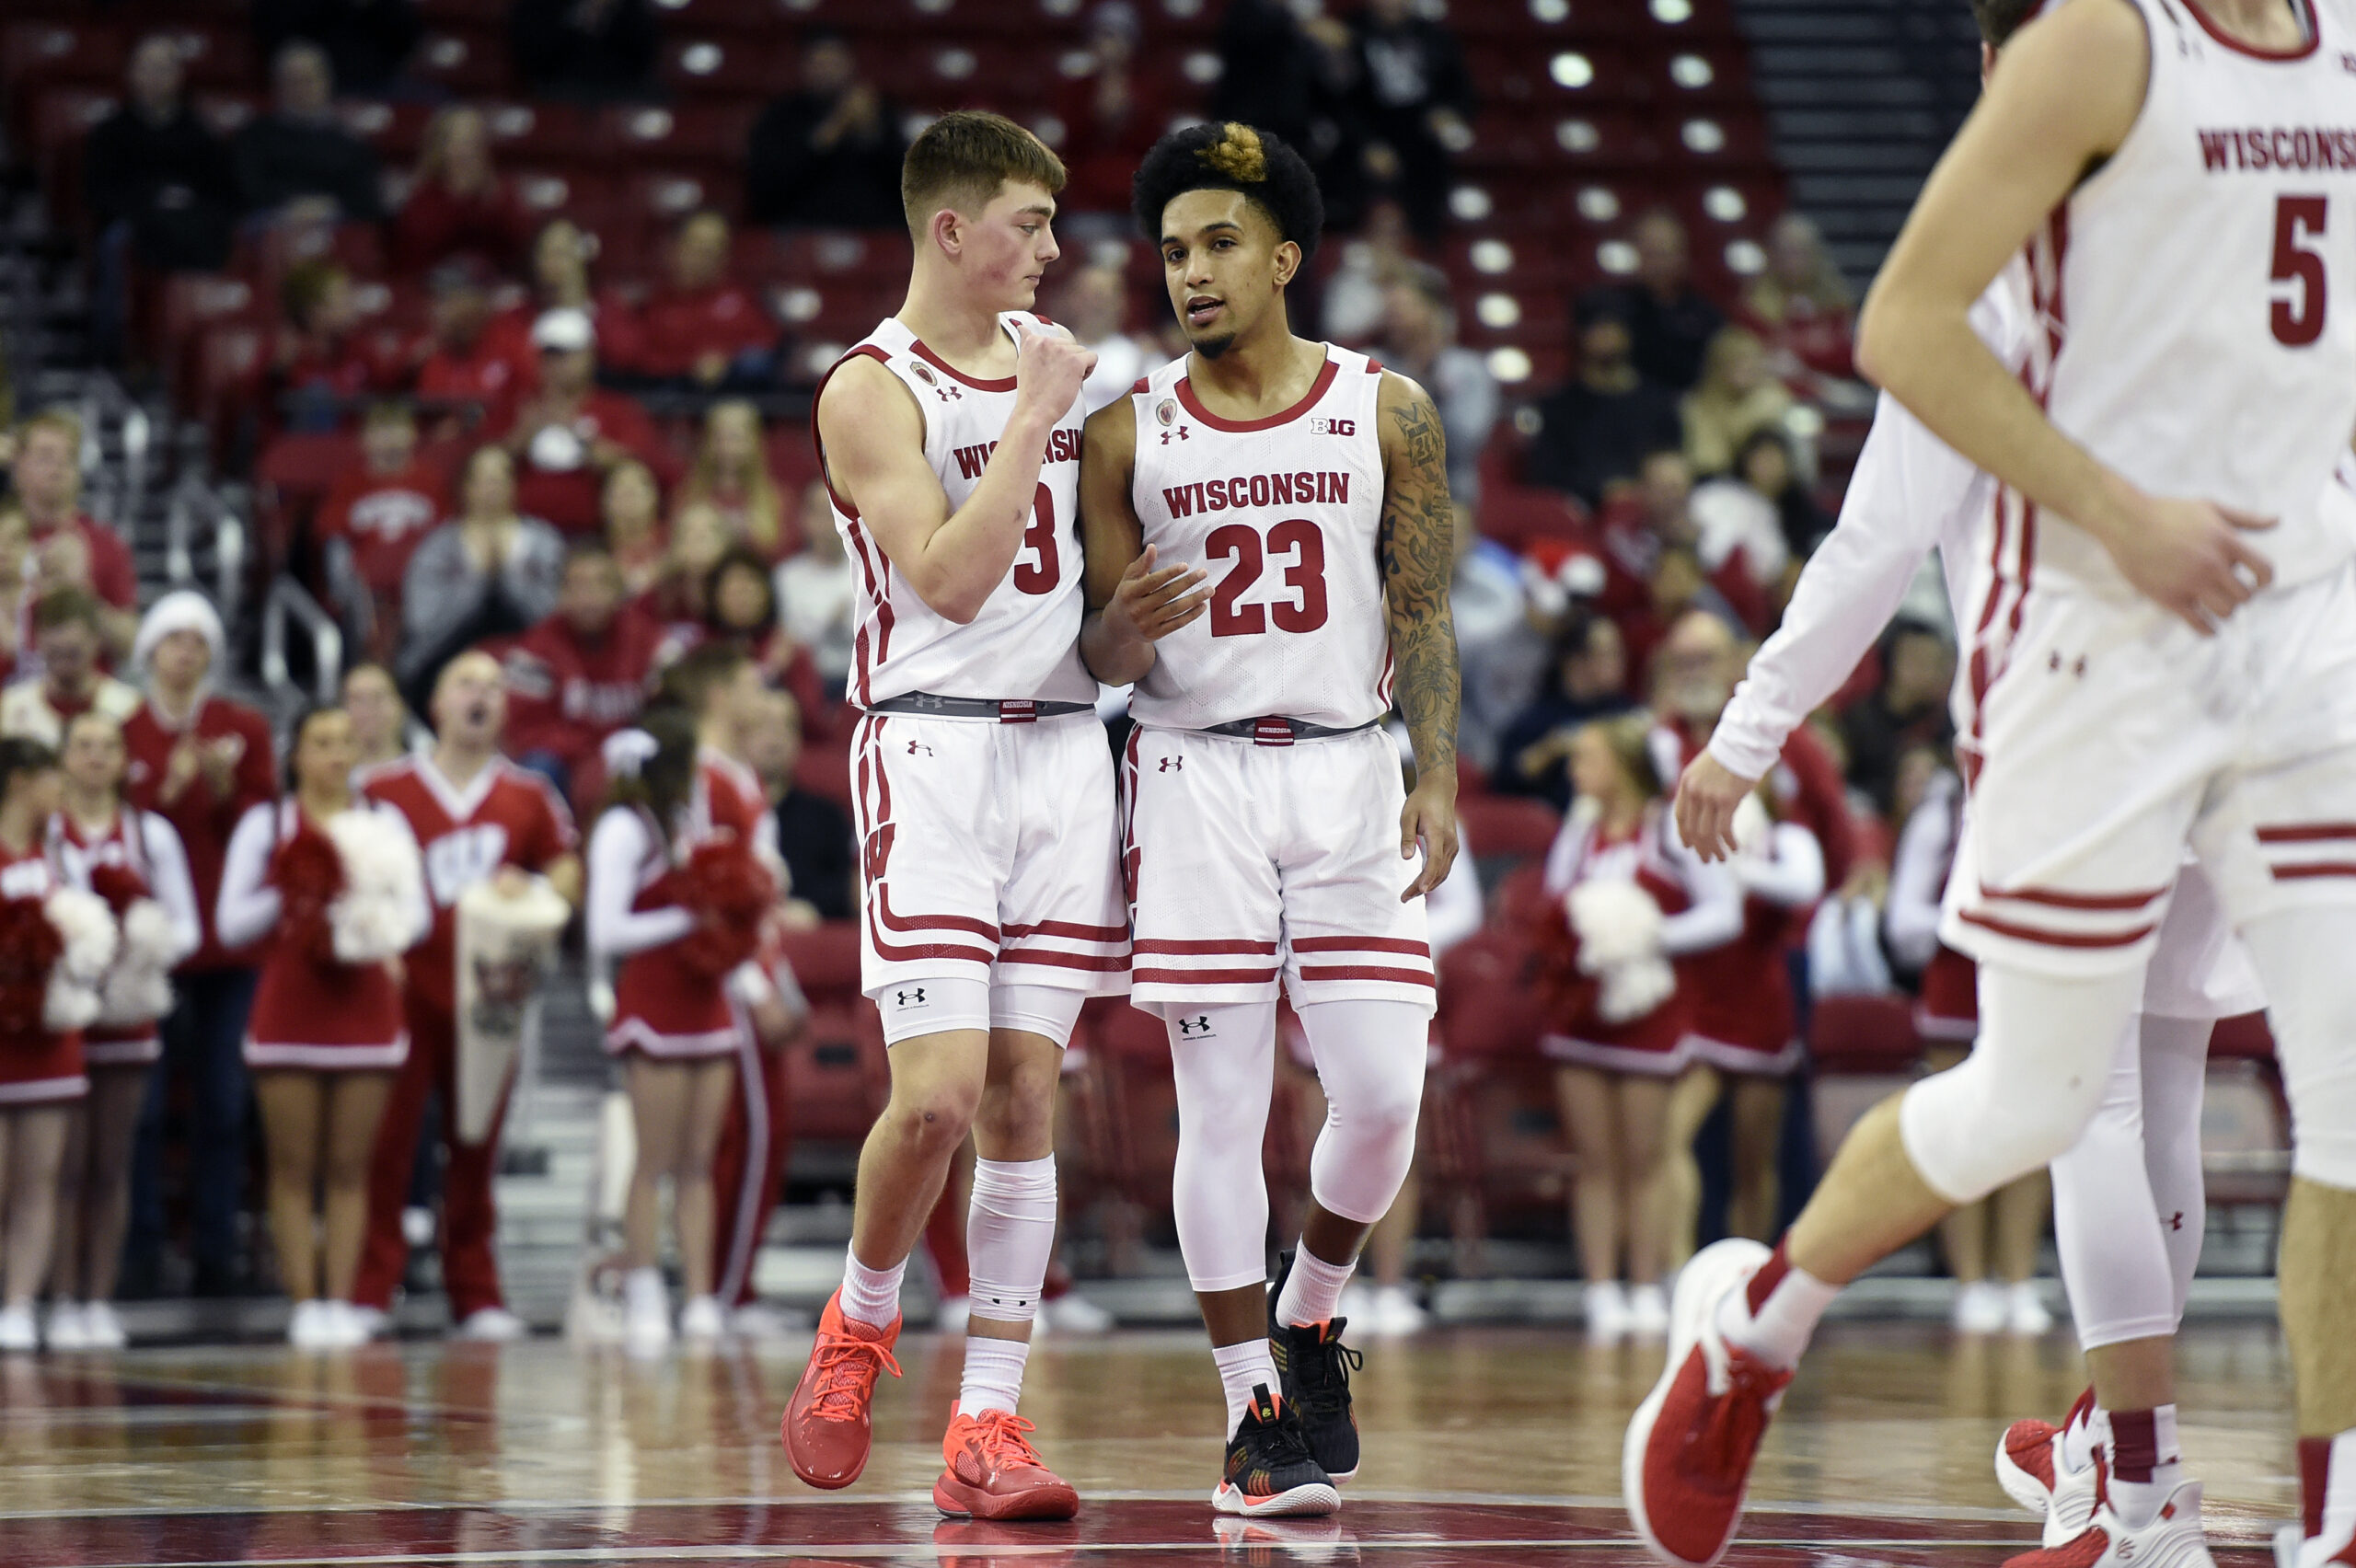 Badgers guard checks in at No. 16 in Andy Katz’s Countdown